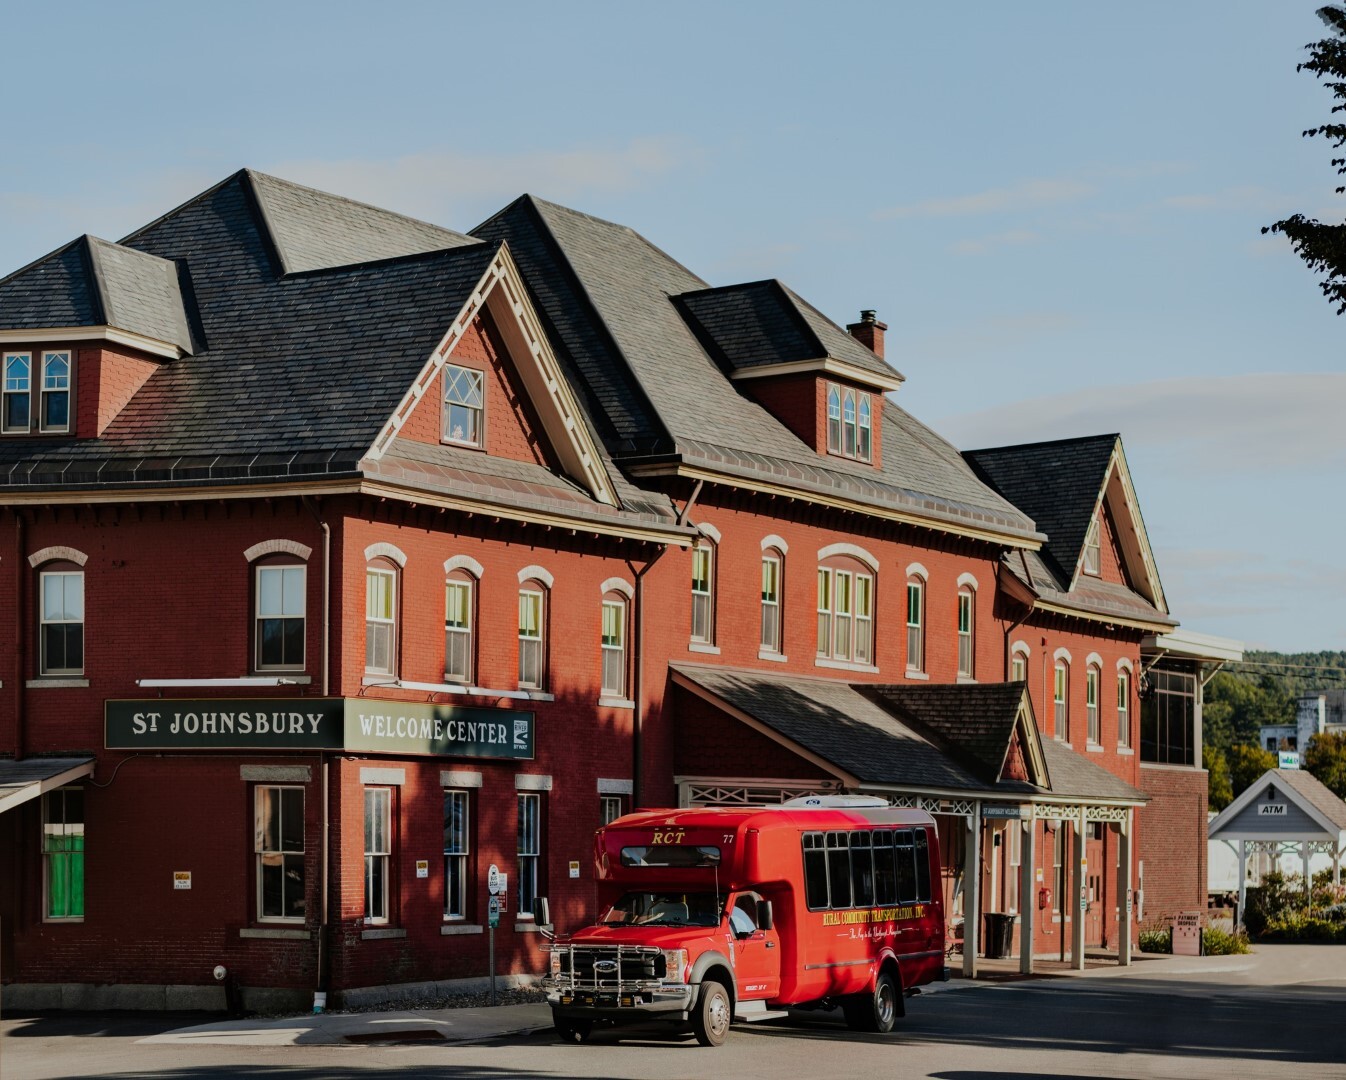 Photo of St. Johnsbury Welcome Center with RCT red shuttle bus stopped in front